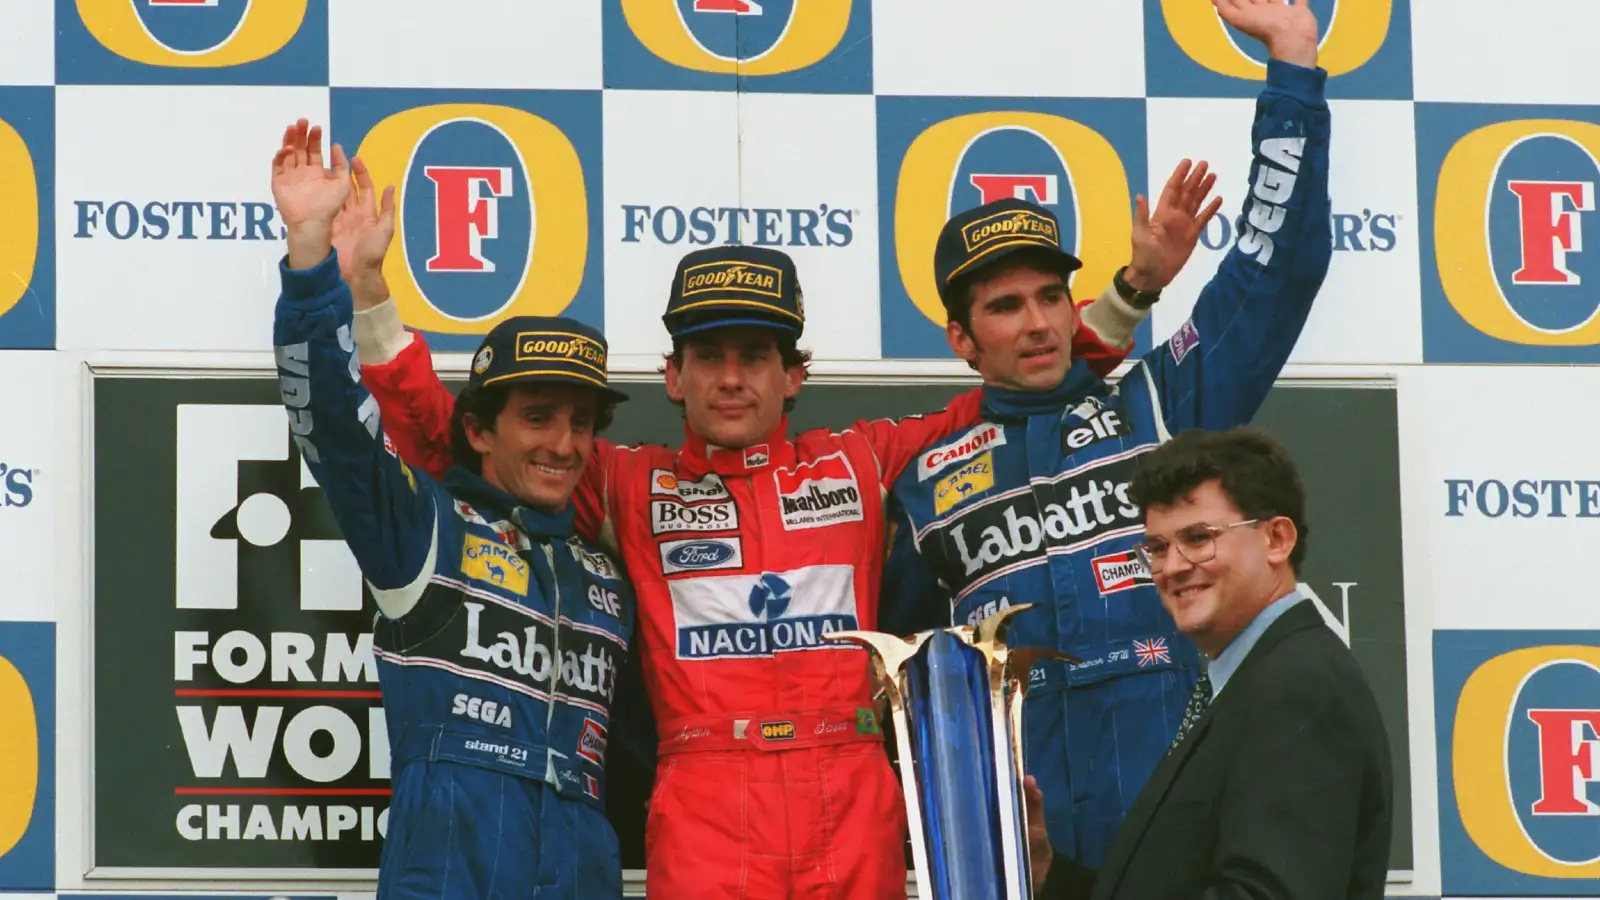 Ayrton Senna and Alain Prost pictured on the podium at the 1993 Australian Grand Prix.